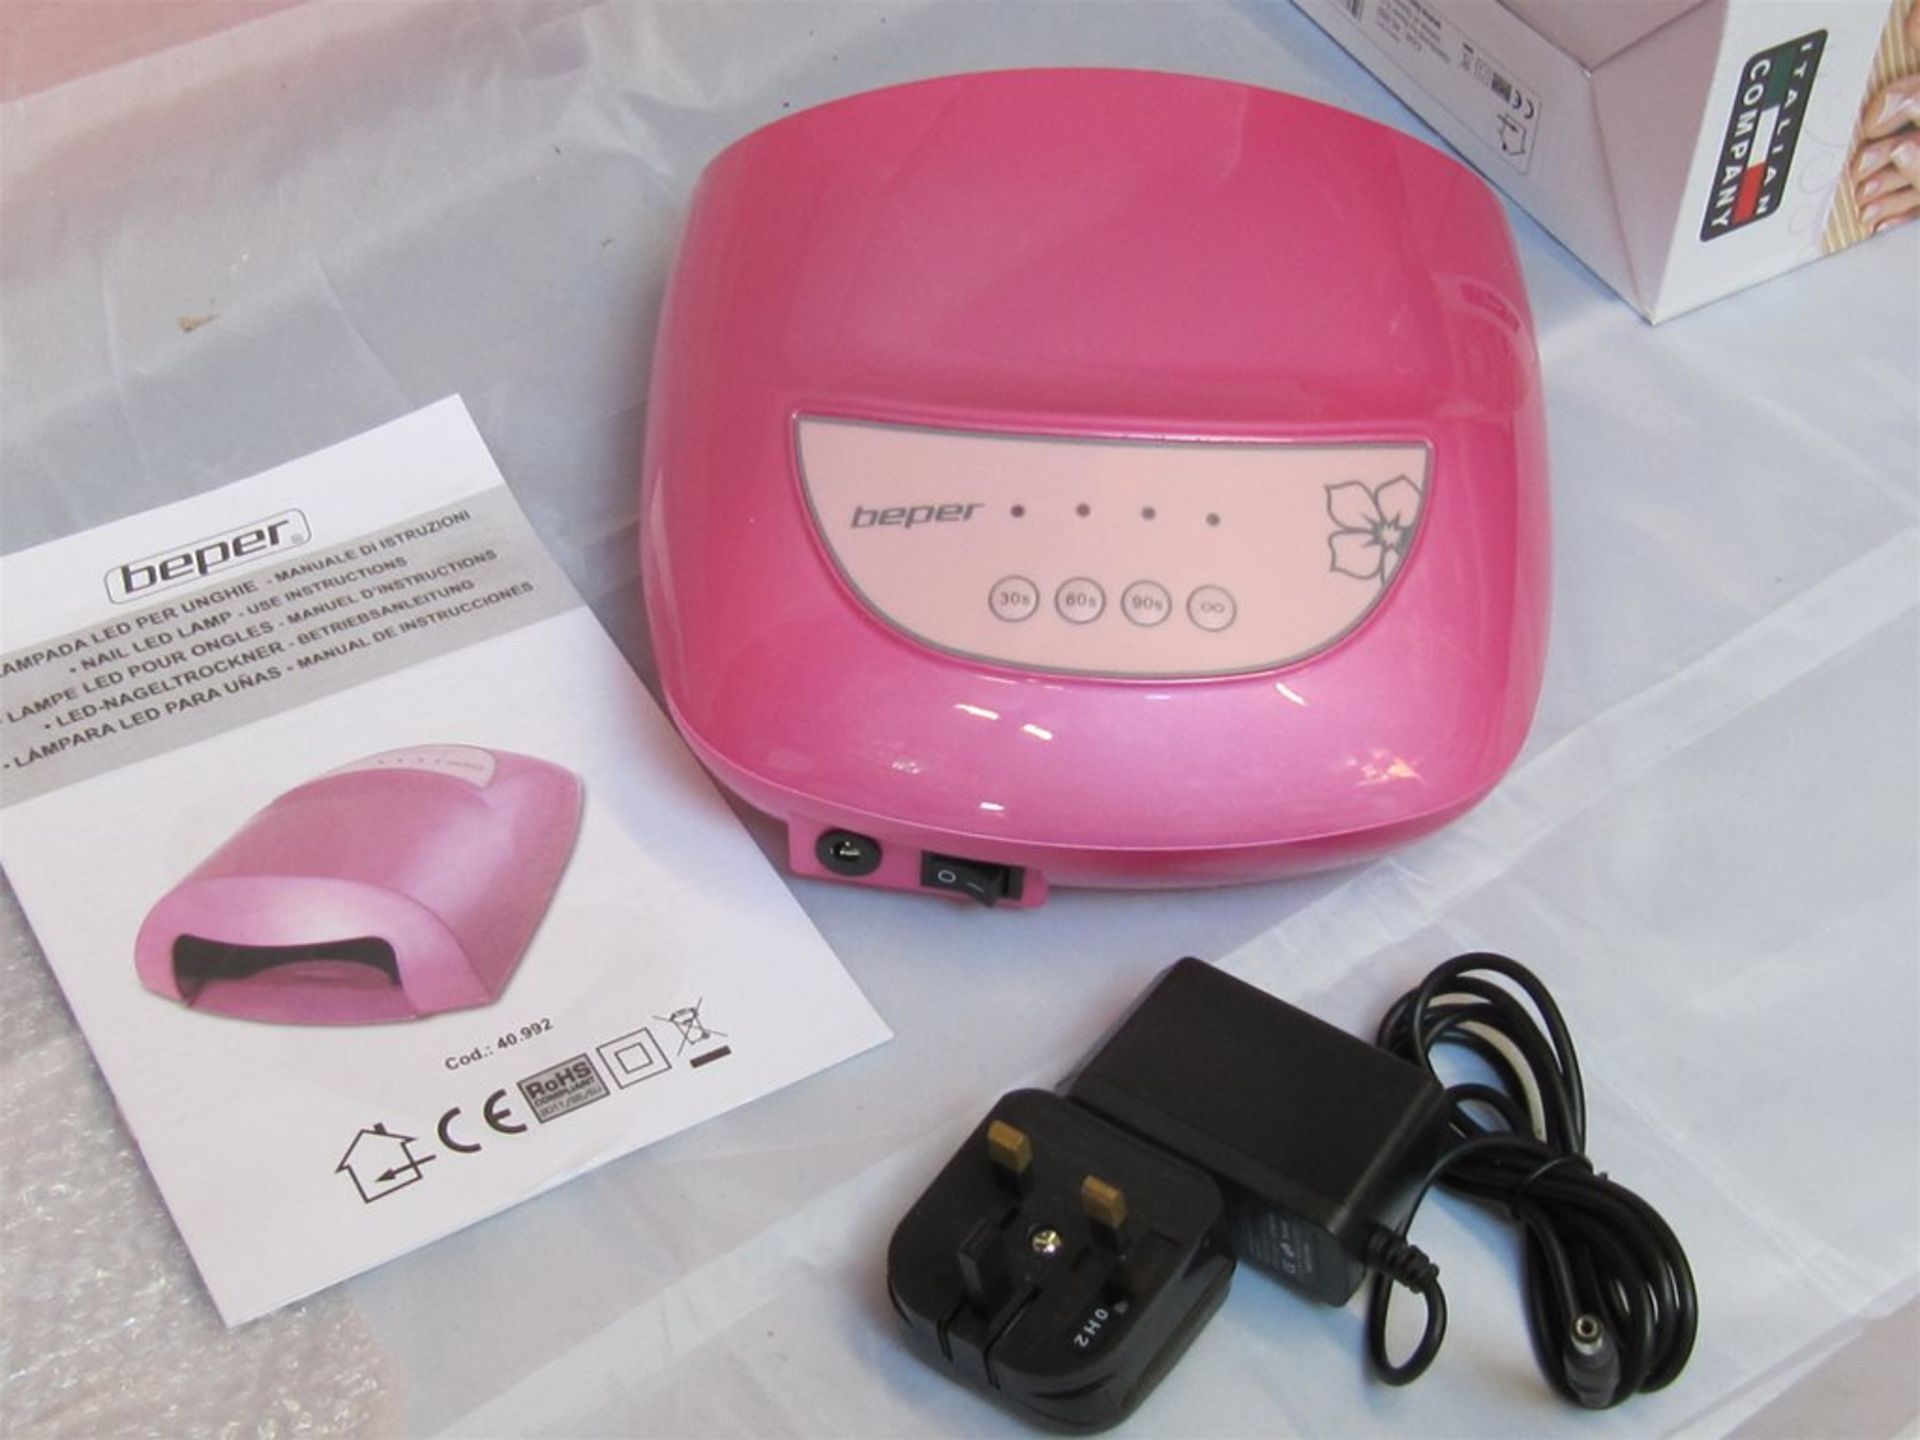 73) Beper LED Nail Lamp. 12w Rapid Dry Time. No vat on Hammer. - Image 2 of 4